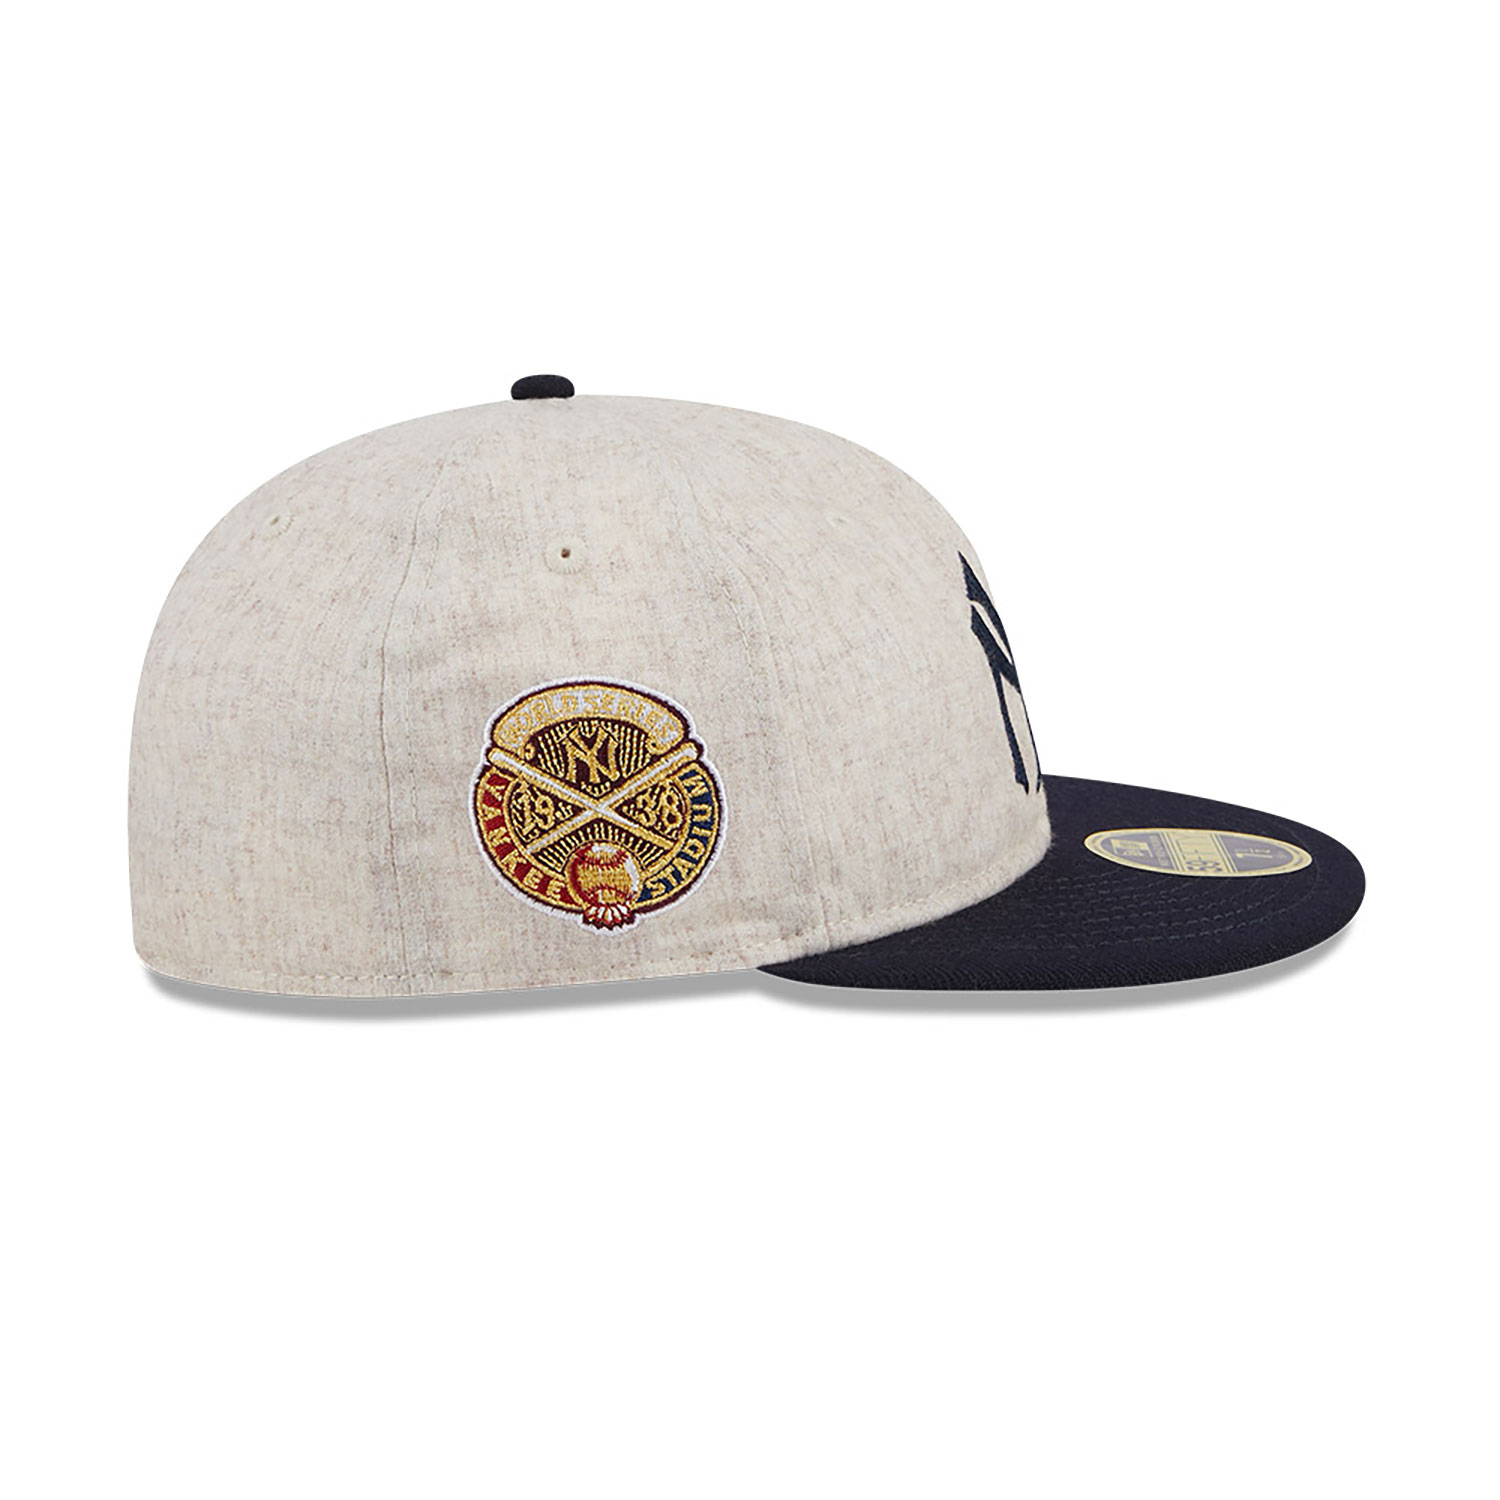 New York Yankees Melton Wool Light Beige Retro Crown 59FIFTY Fitted Cap